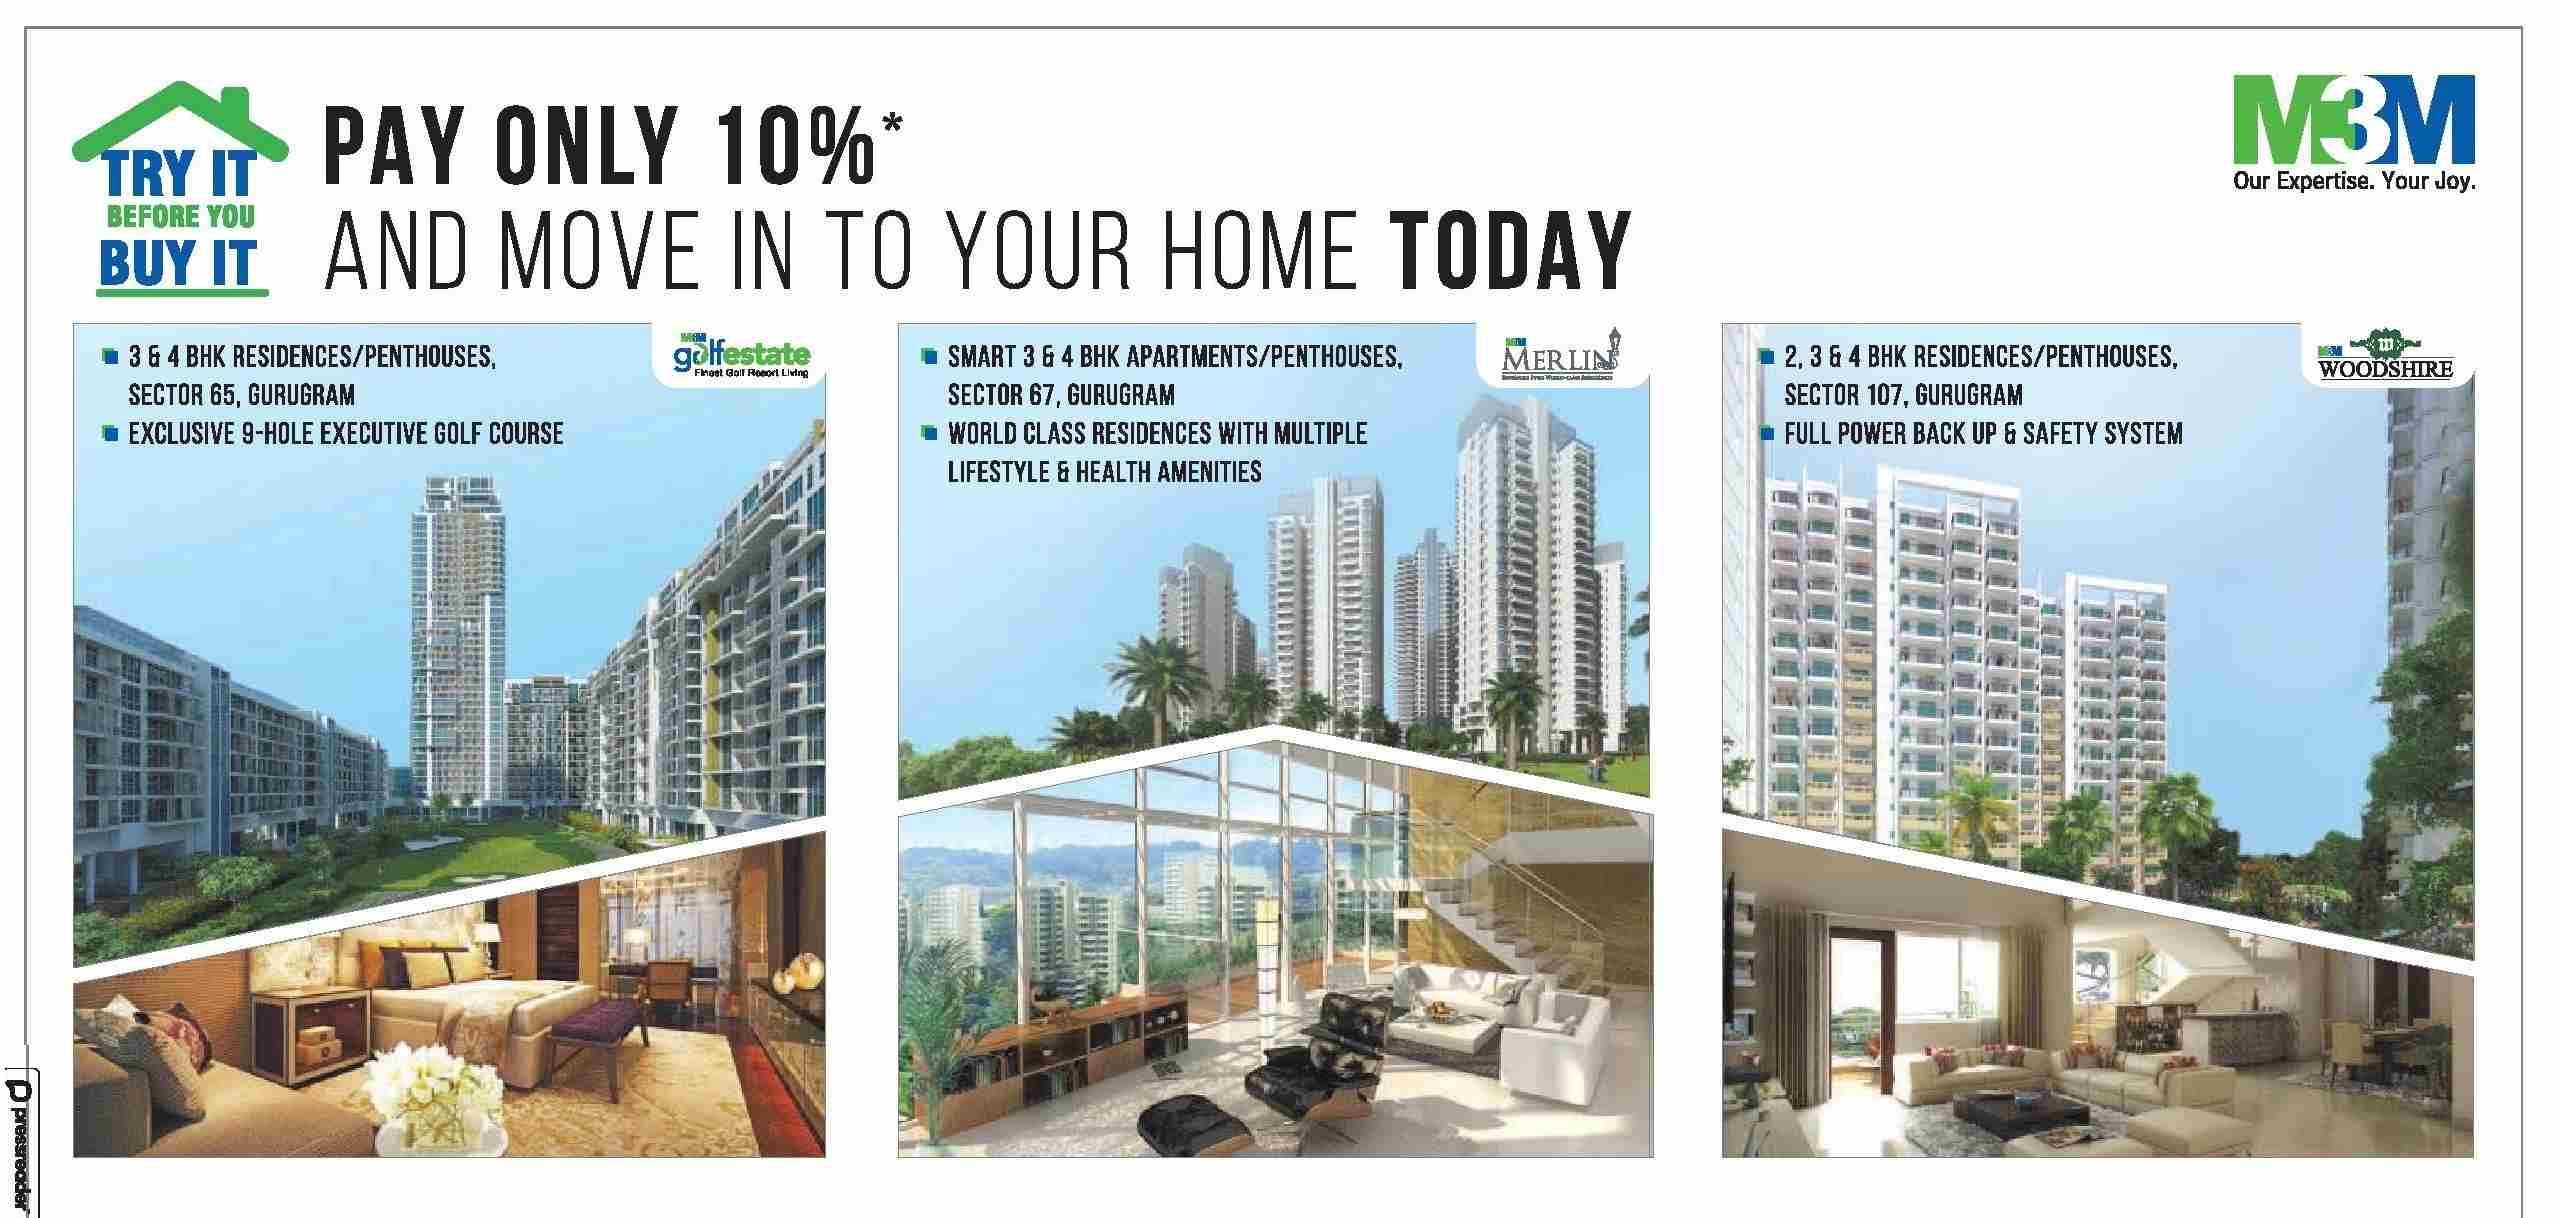 Try it before you buy it at M3M homes in Gurgaon Update